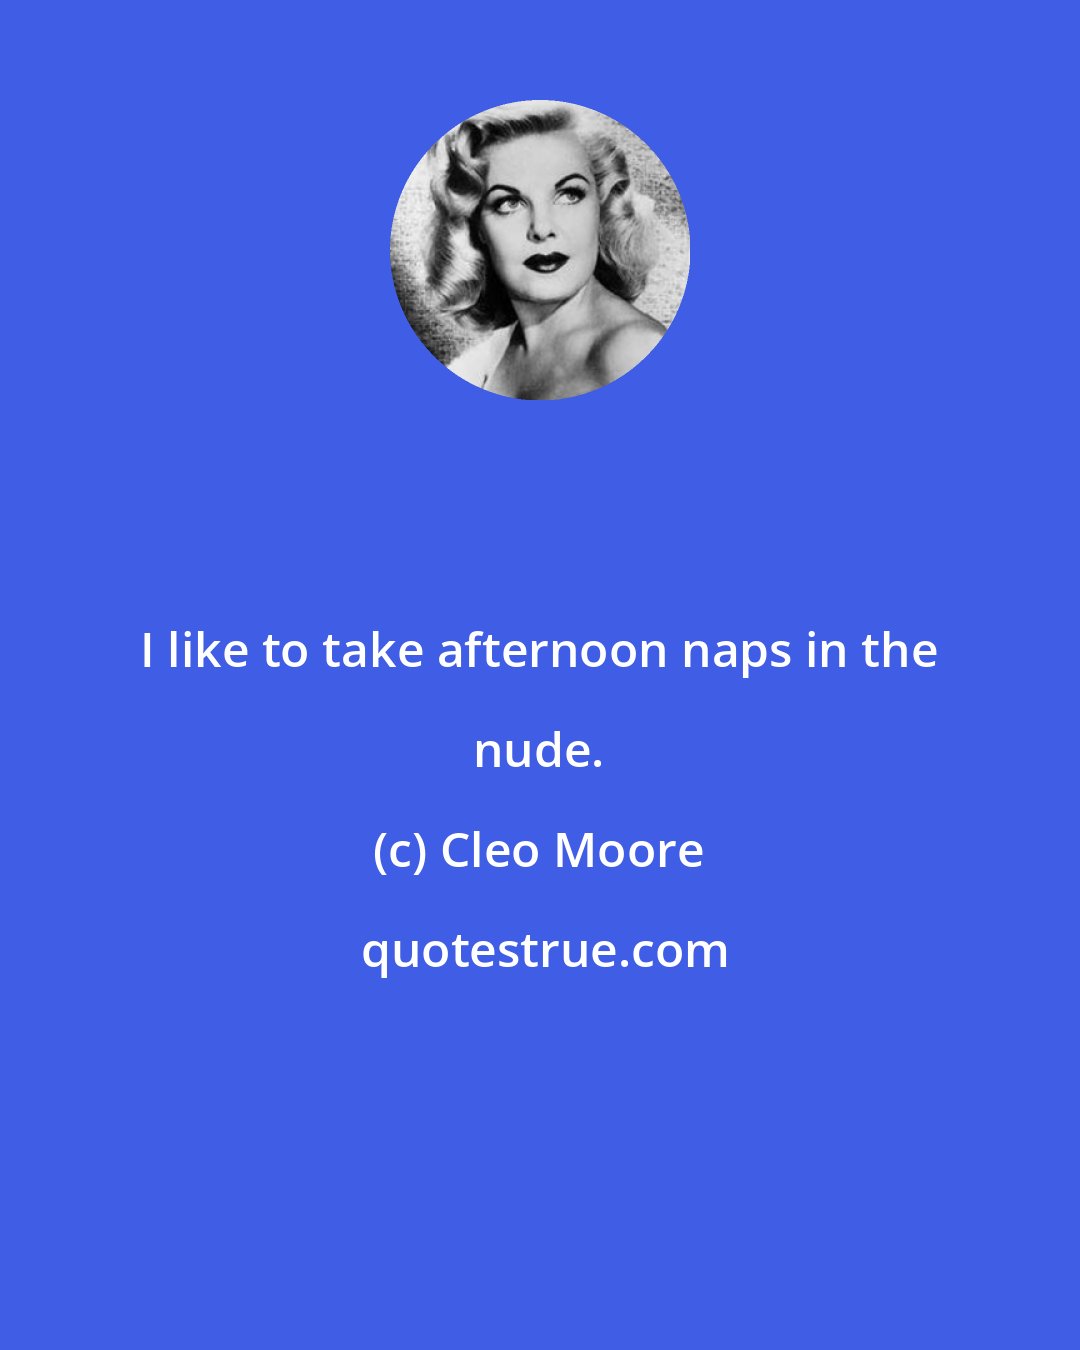 Cleo Moore: I like to take afternoon naps in the nude.